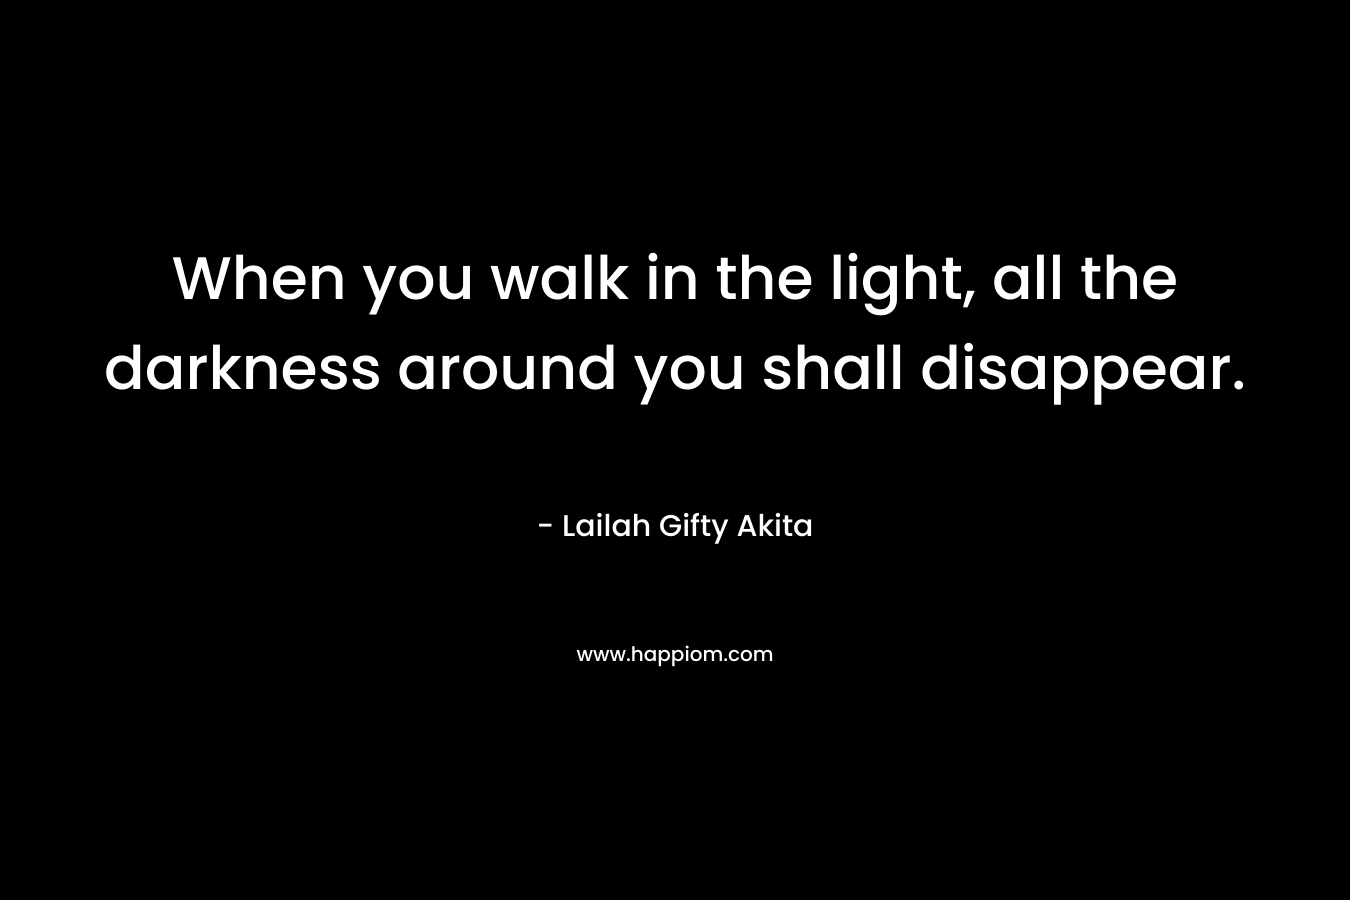 When you walk in the light, all the darkness around you shall disappear.